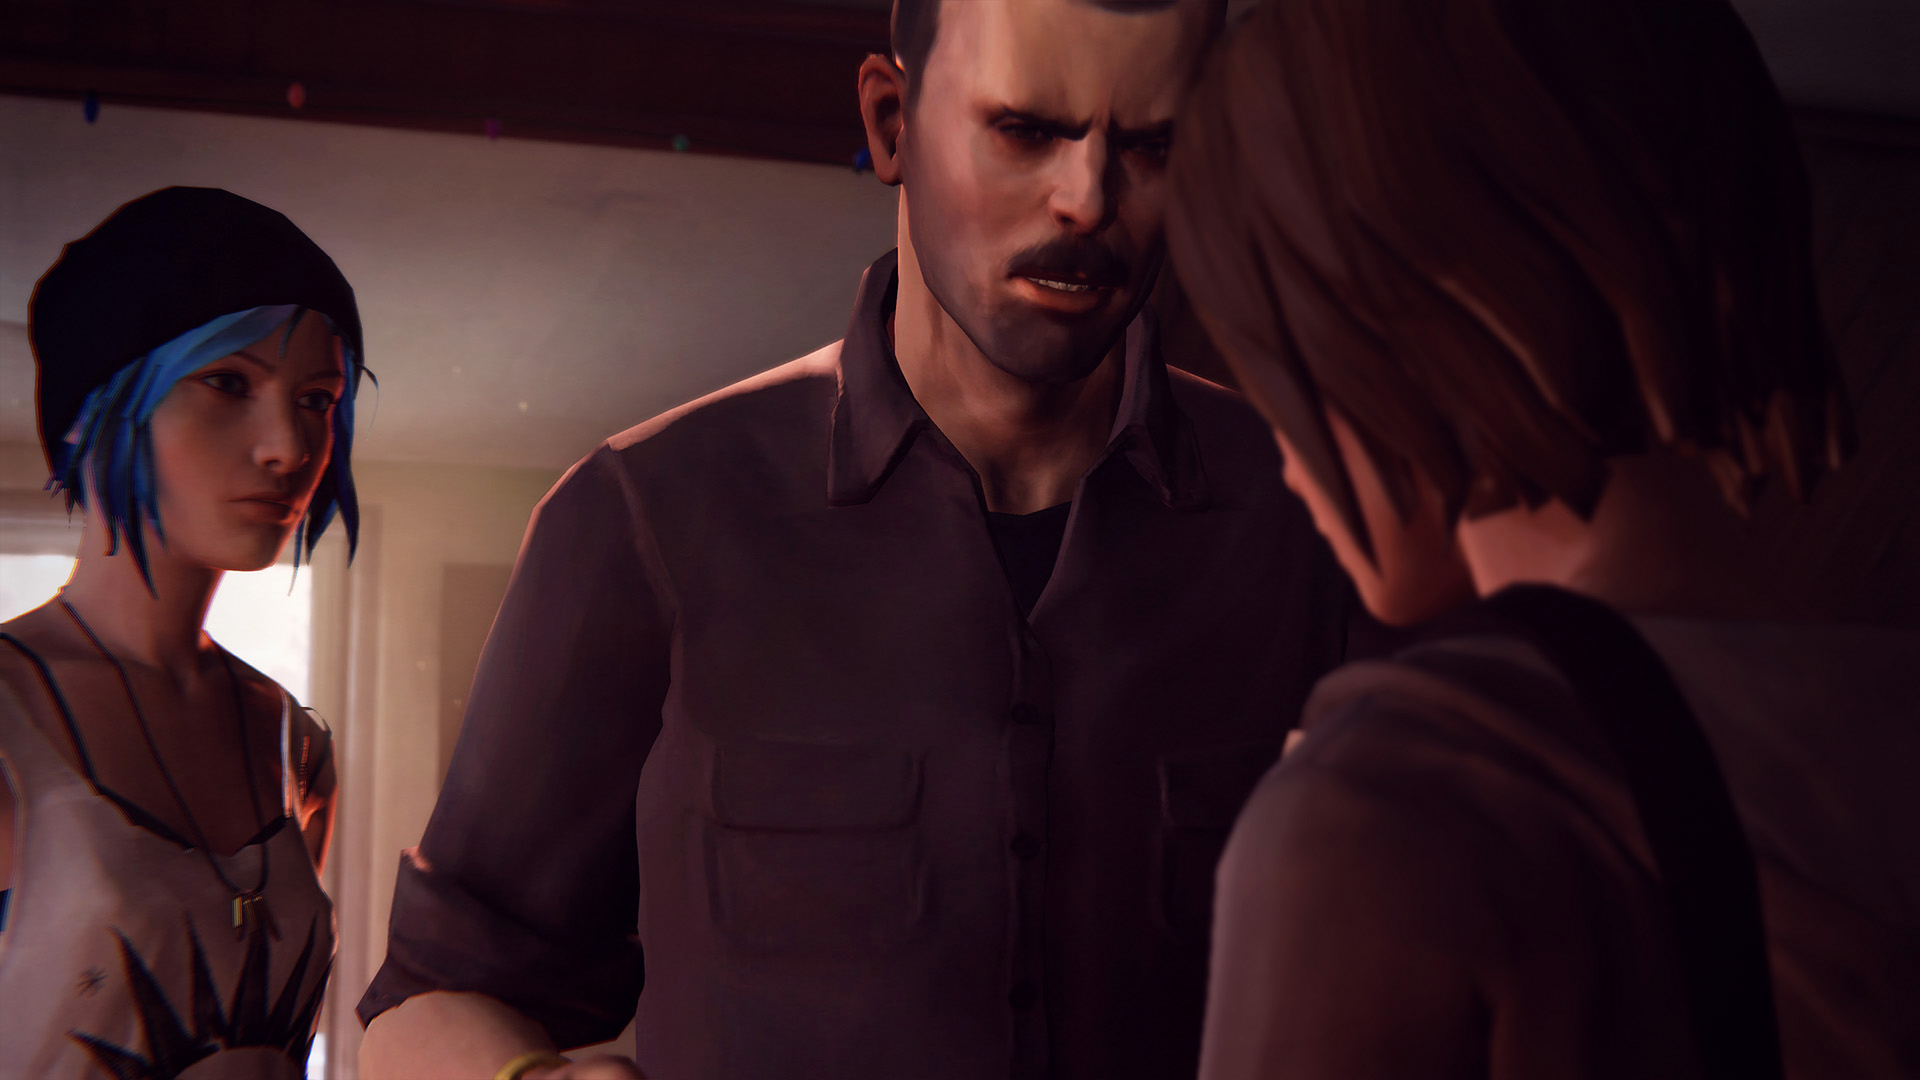 Life Is Strange Limited Edition